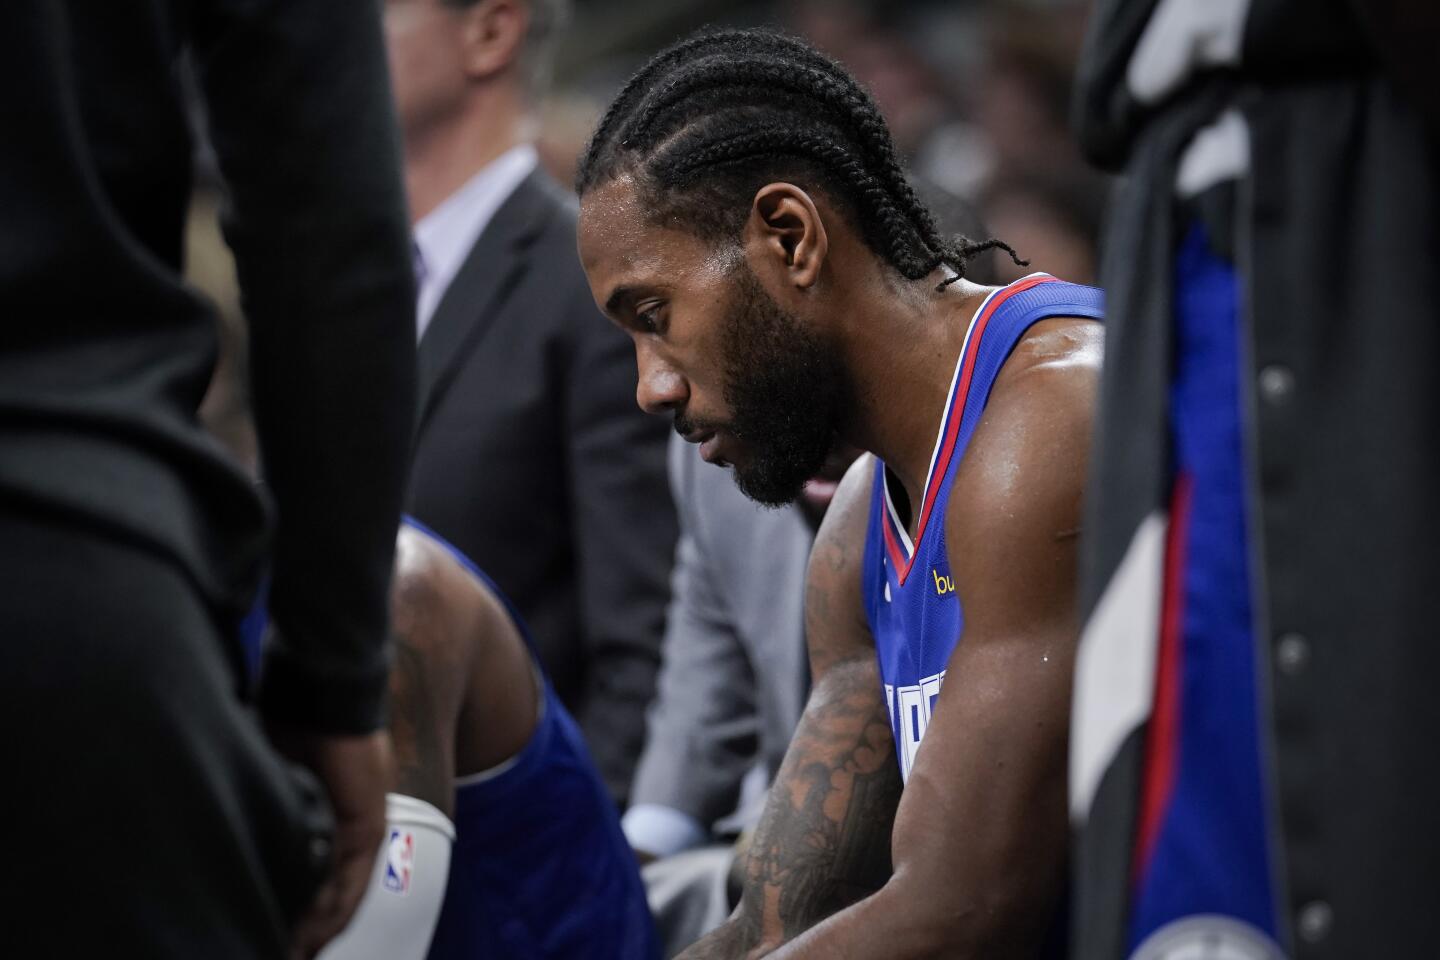 Clippers forward Kawhi Leonard sits on the bench during a timeout in the second half of a game against the Spurs on Nov. 29.